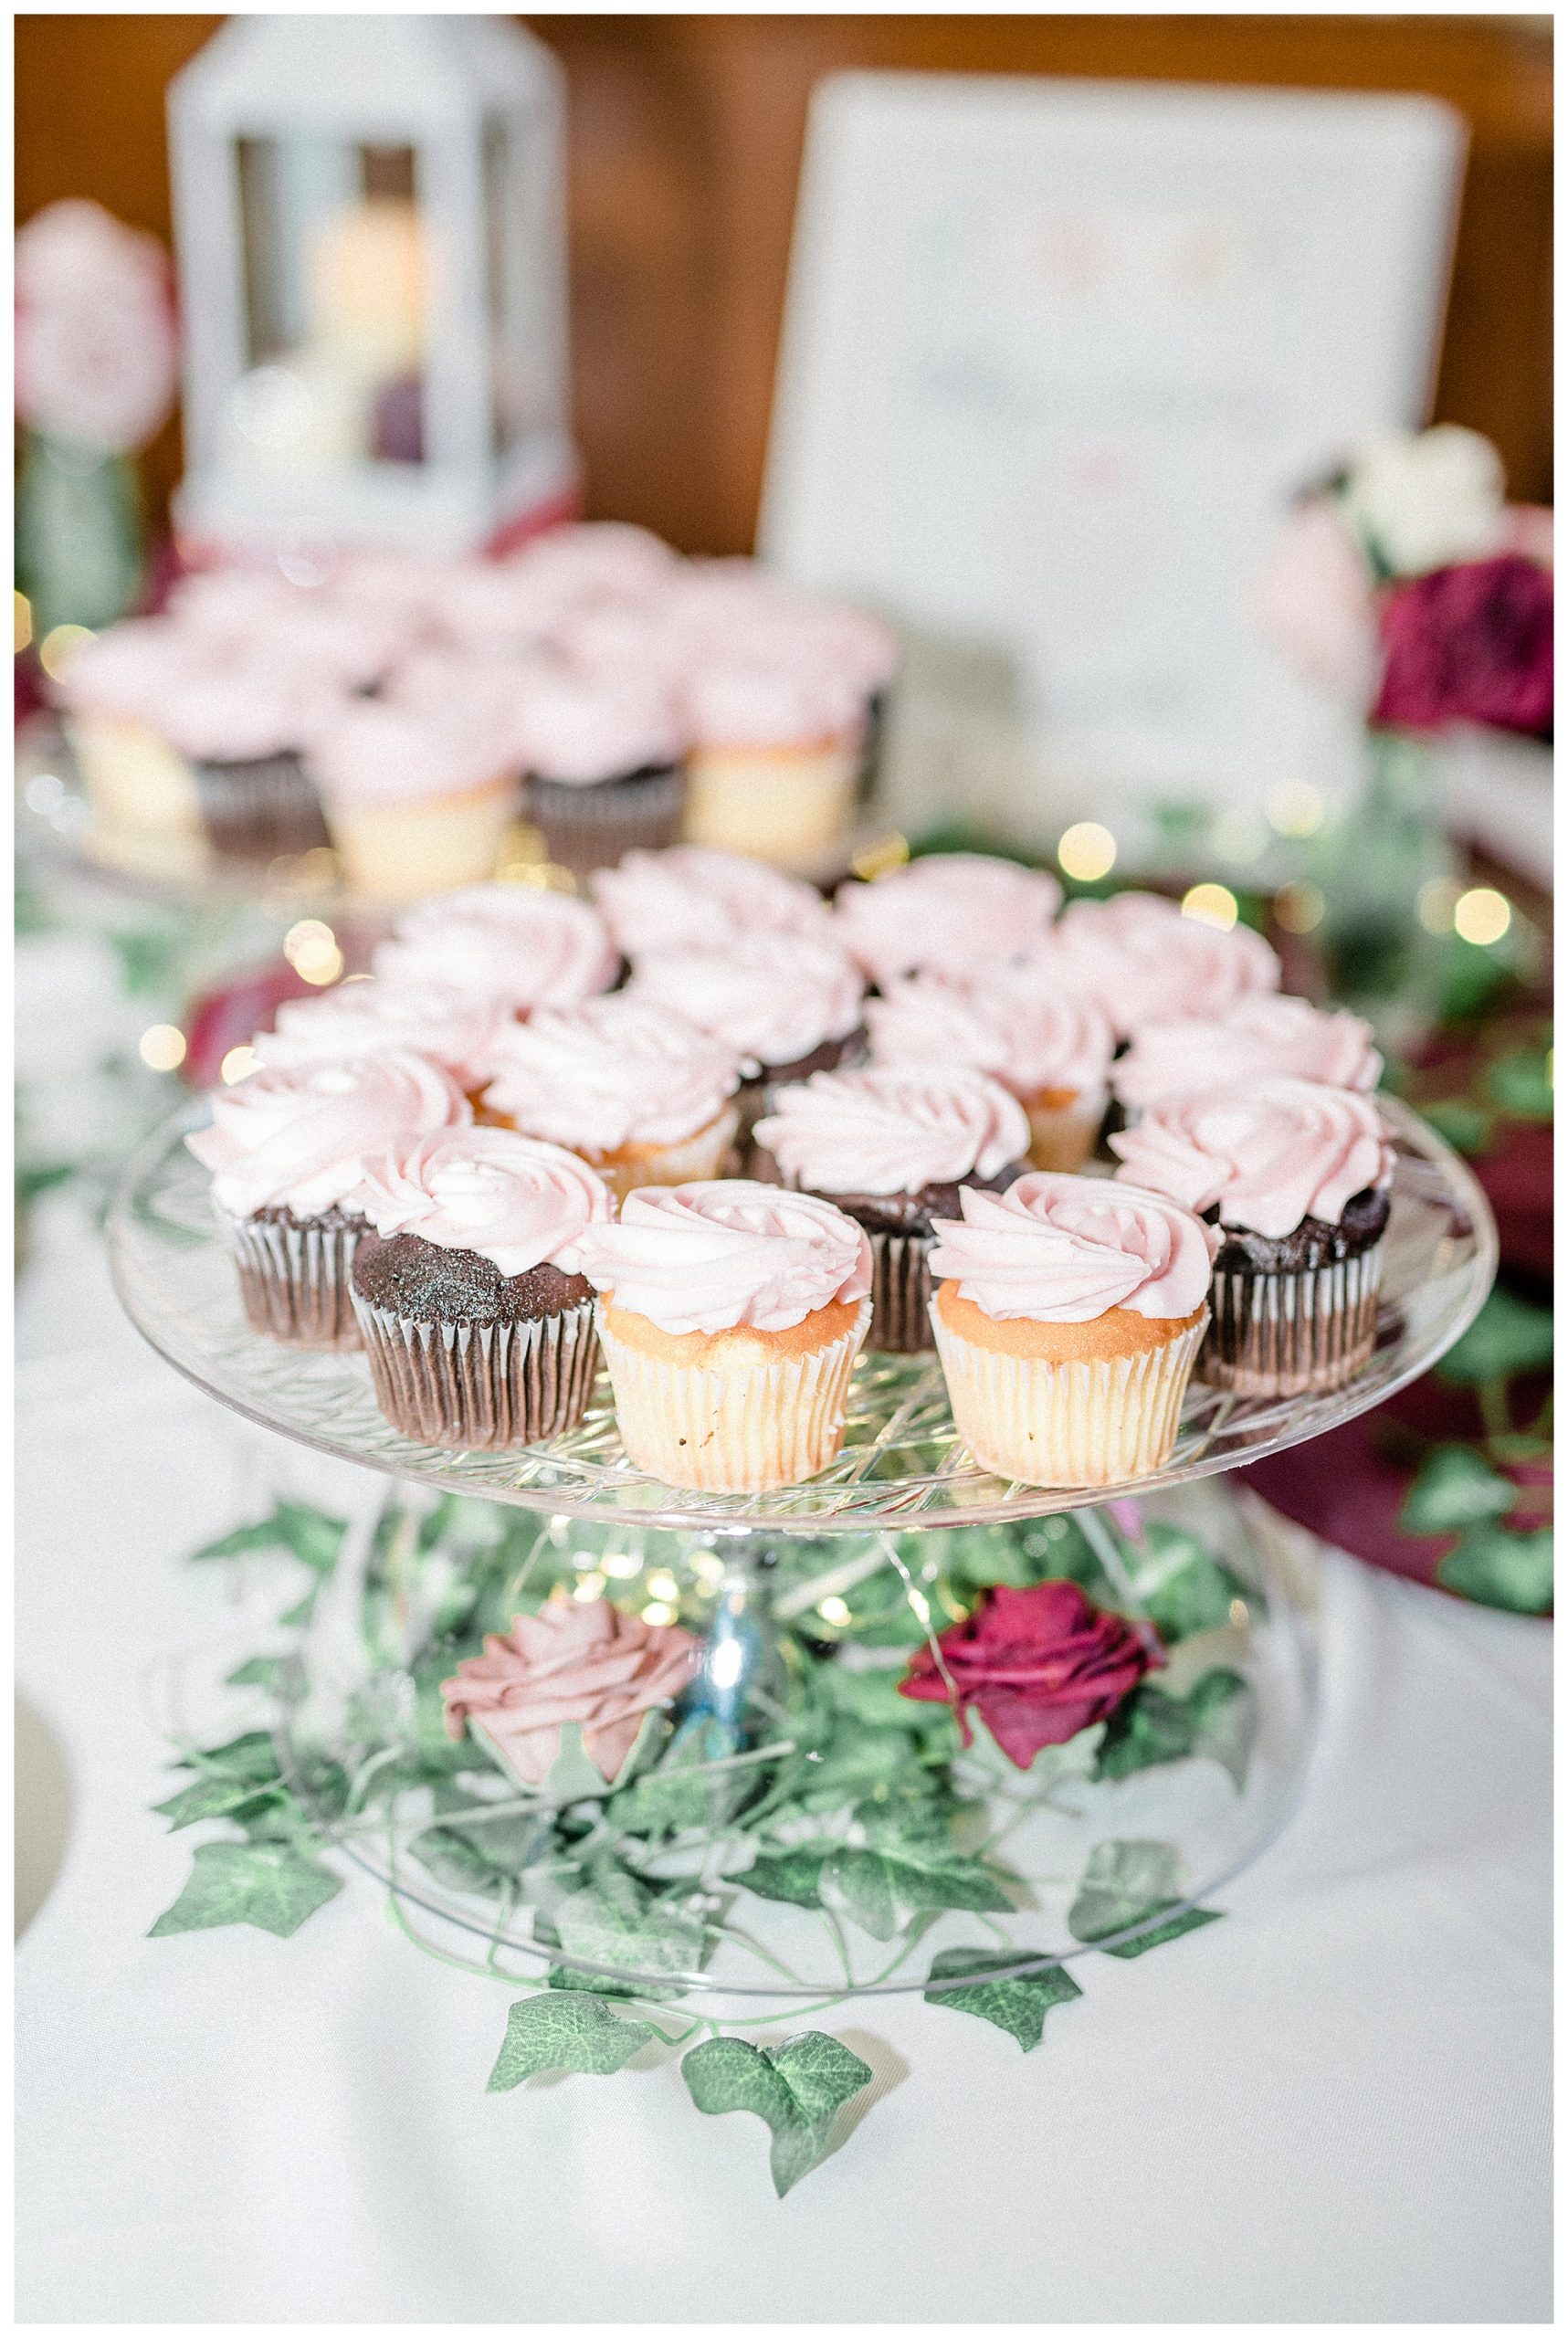 Burgundy and pink wedding reception at PNA Hall in Minneapolis. This one has cupcakes.